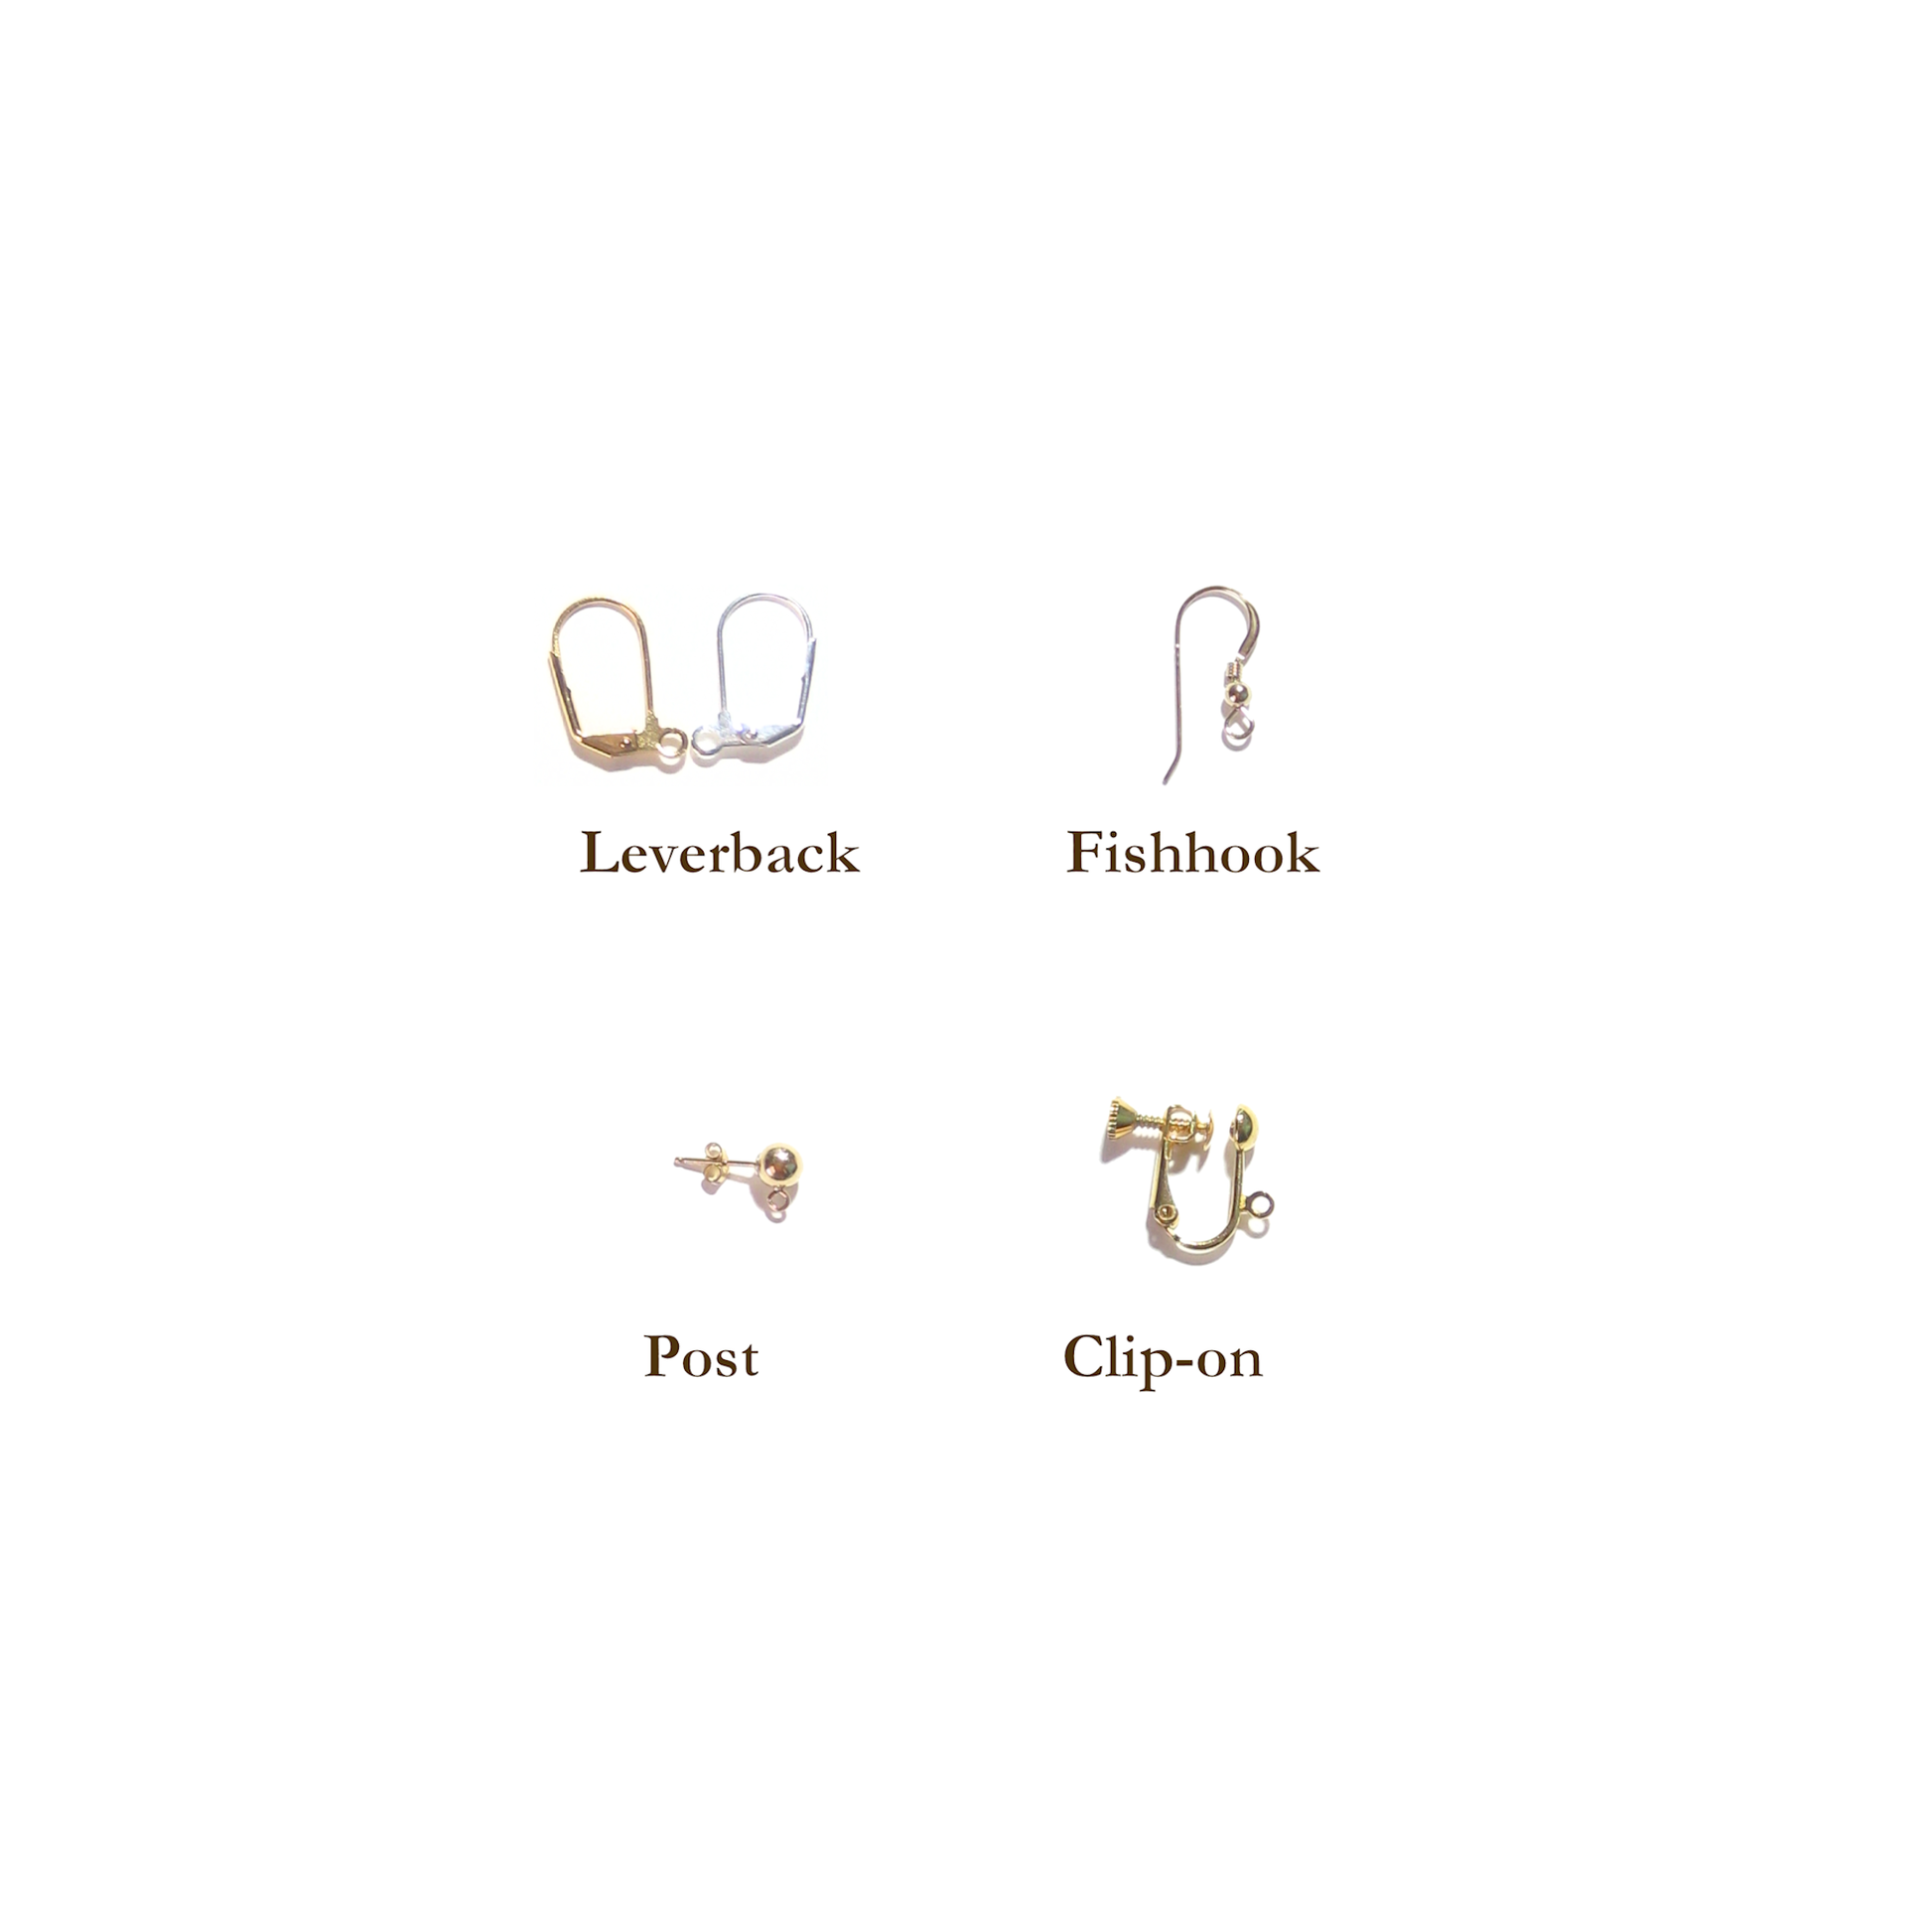 Four different style of earrings